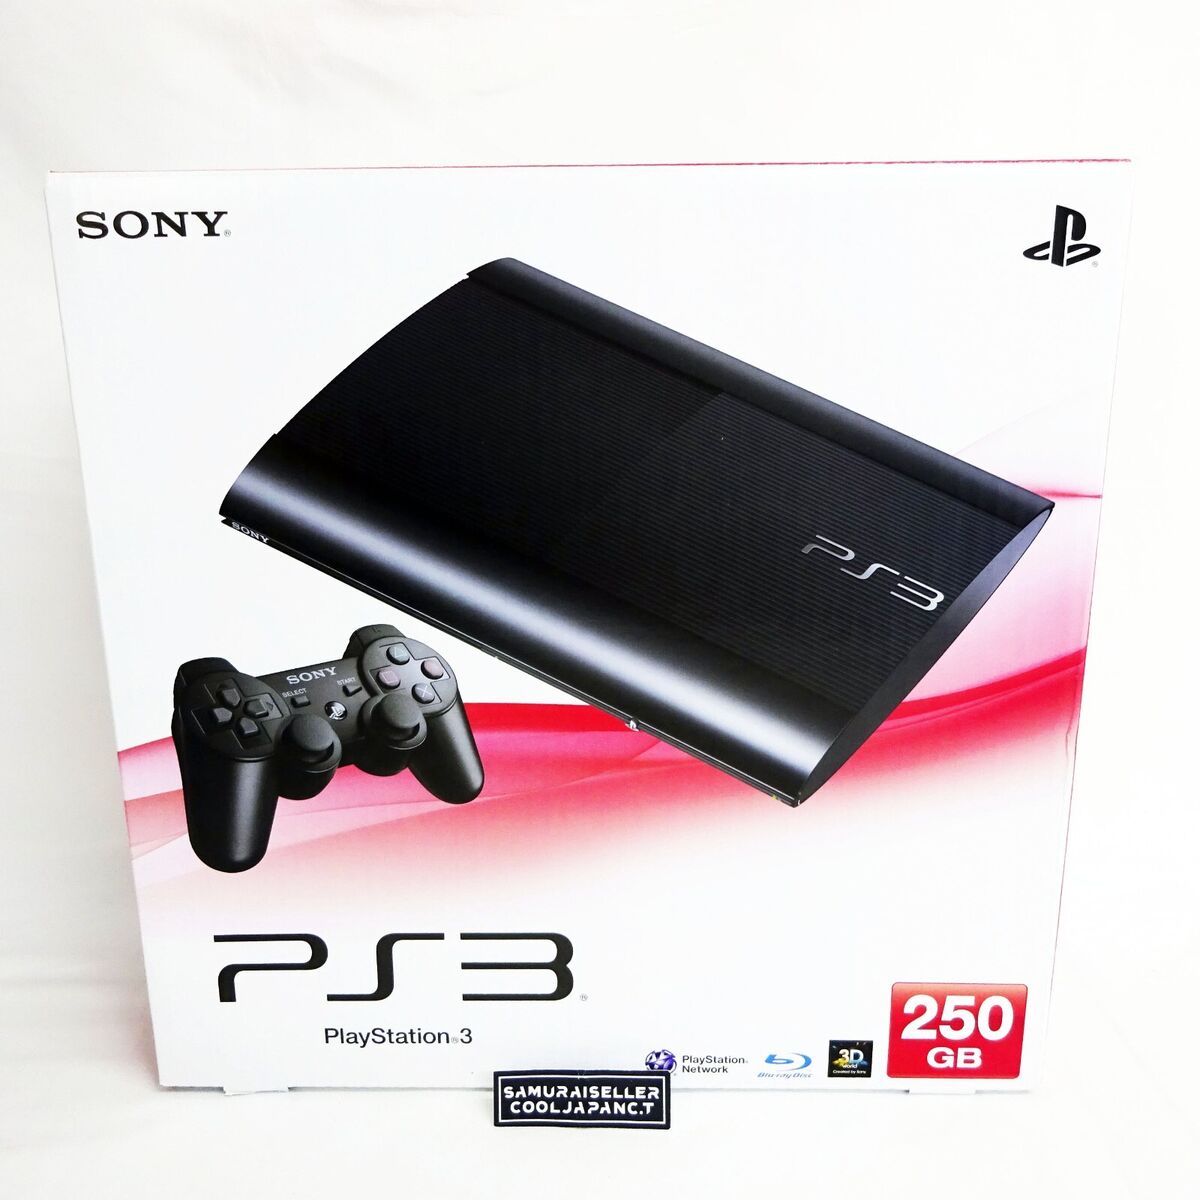 SONY PS3 PlayStation 3 250GB Black CECH-4200B Console Japan BRAND NEW